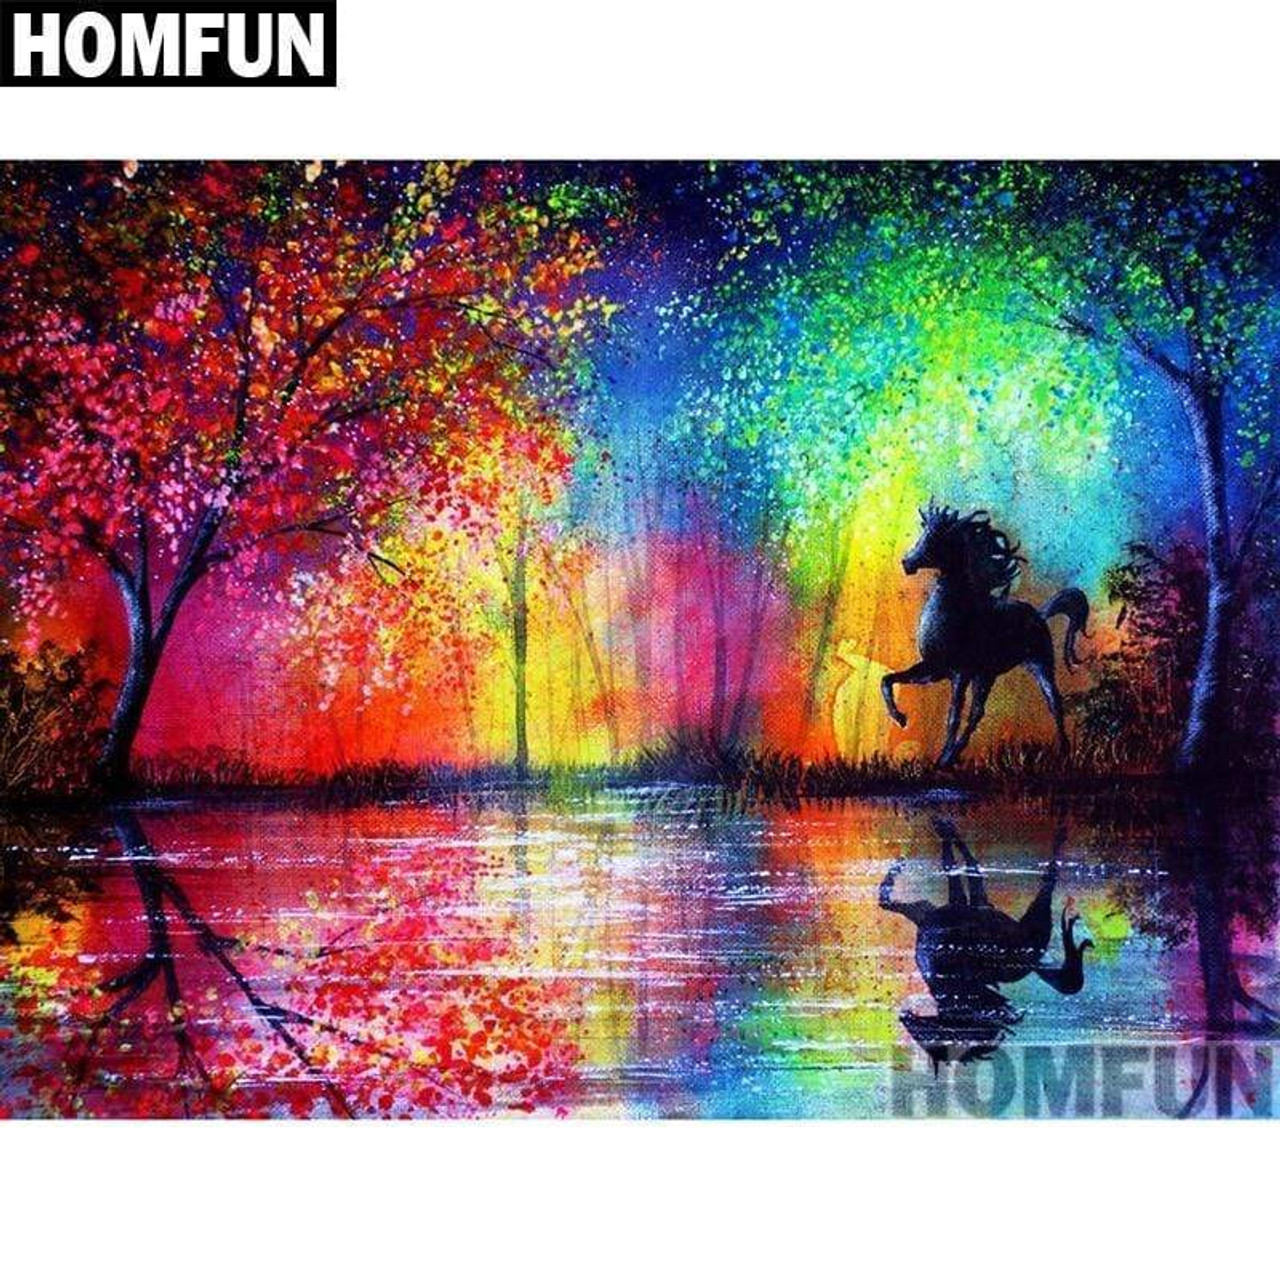 Horse Friends Diamond Painting Kit with Free Shipping – 5D Diamond Paintings